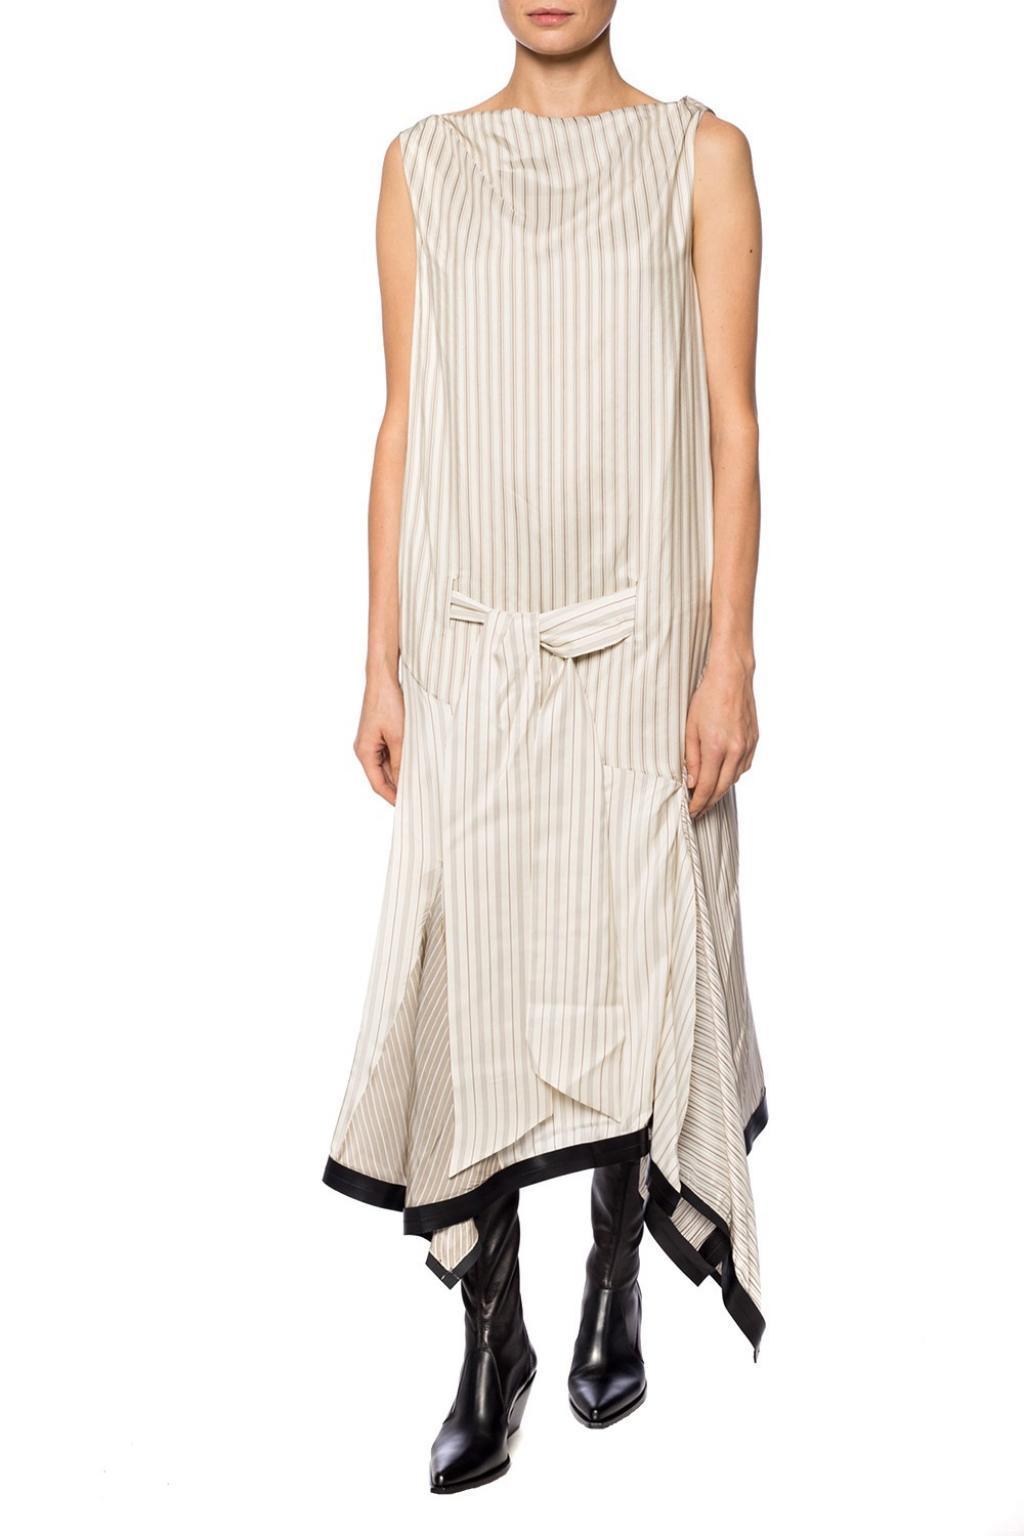 JW Anderson Striped Dress in Natural - Lyst